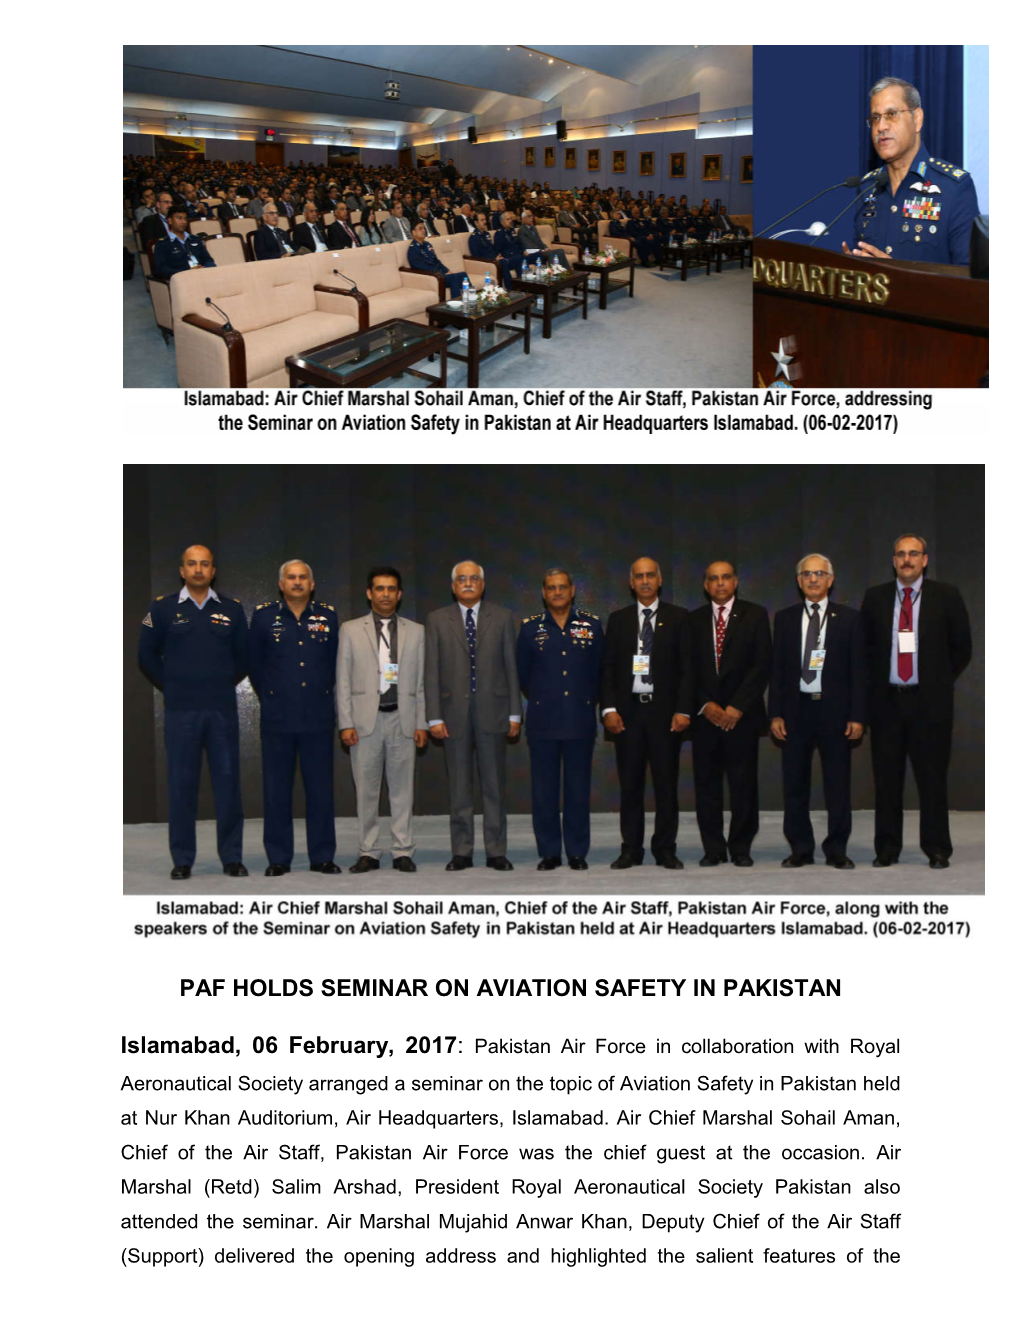 Paf Holds Seminar on Aviation Safety in Pakistan